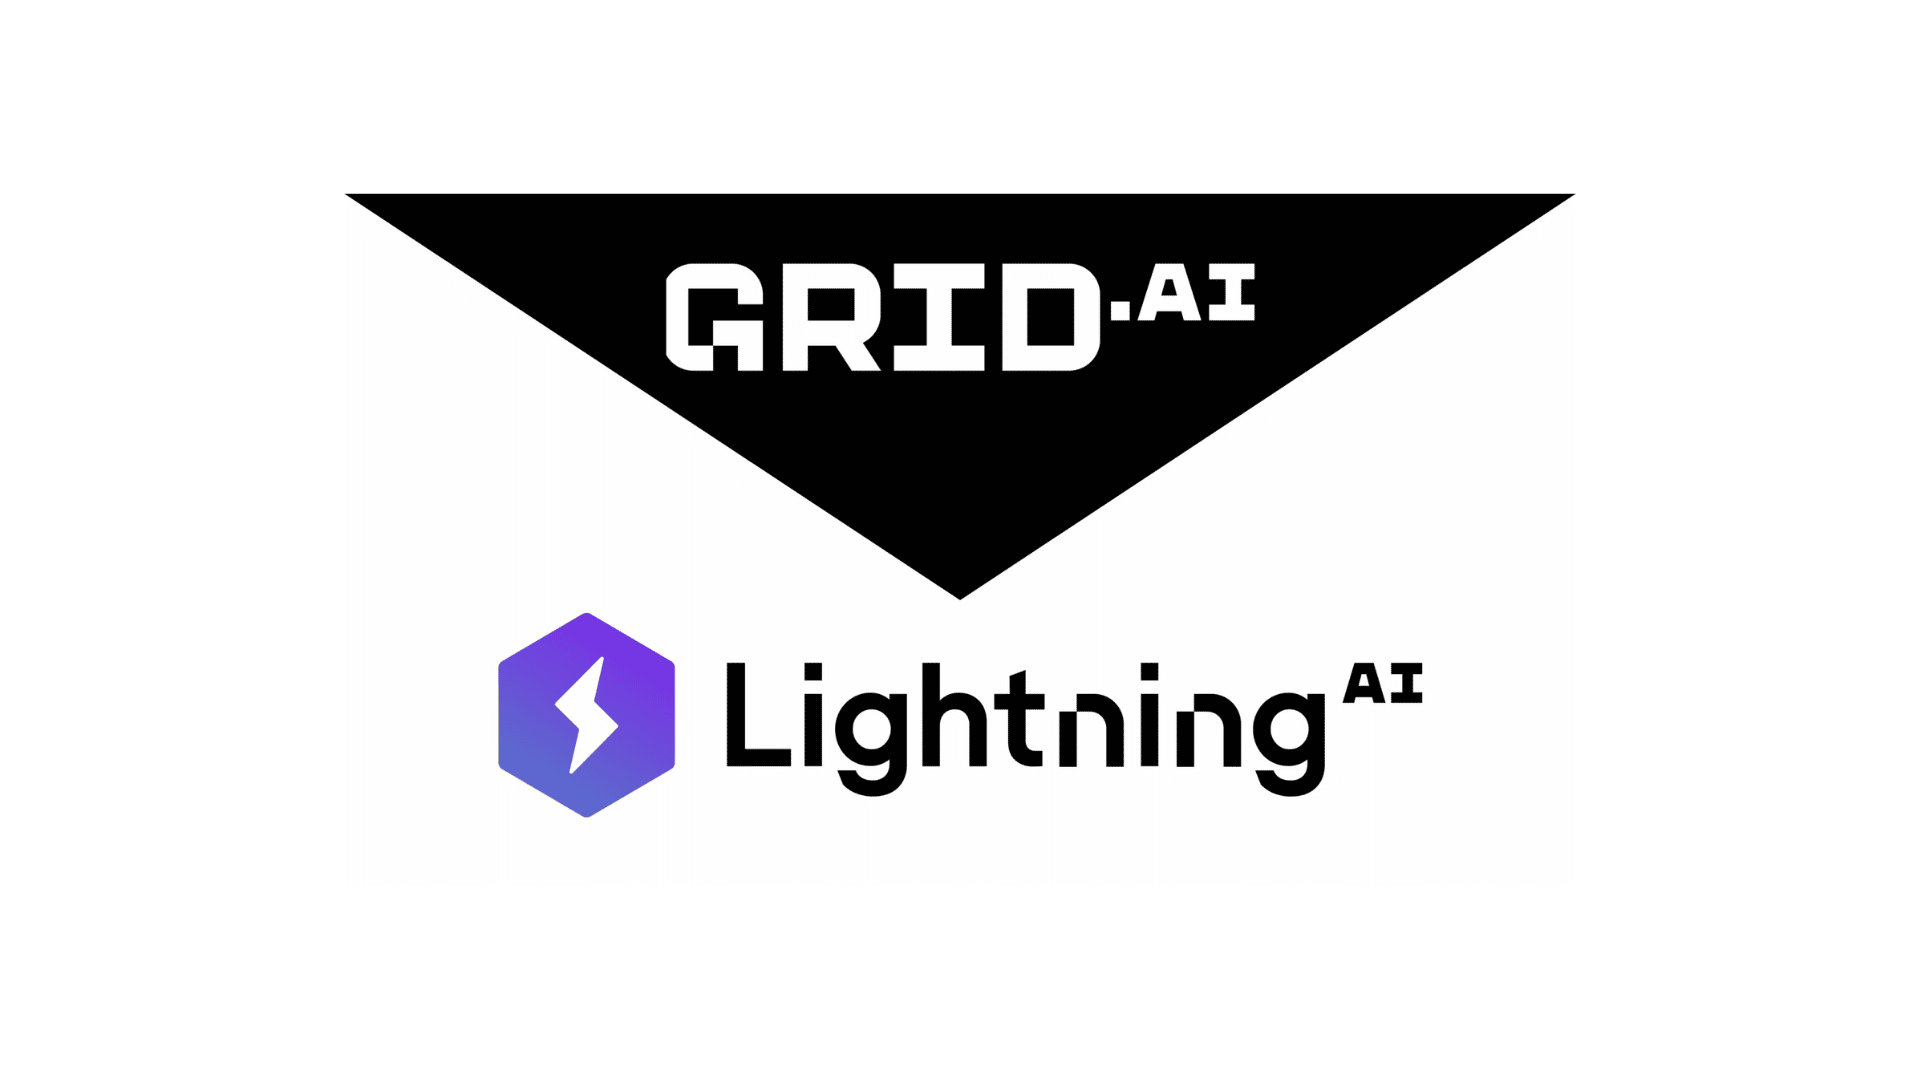 Grid.ai is now Lightning AI